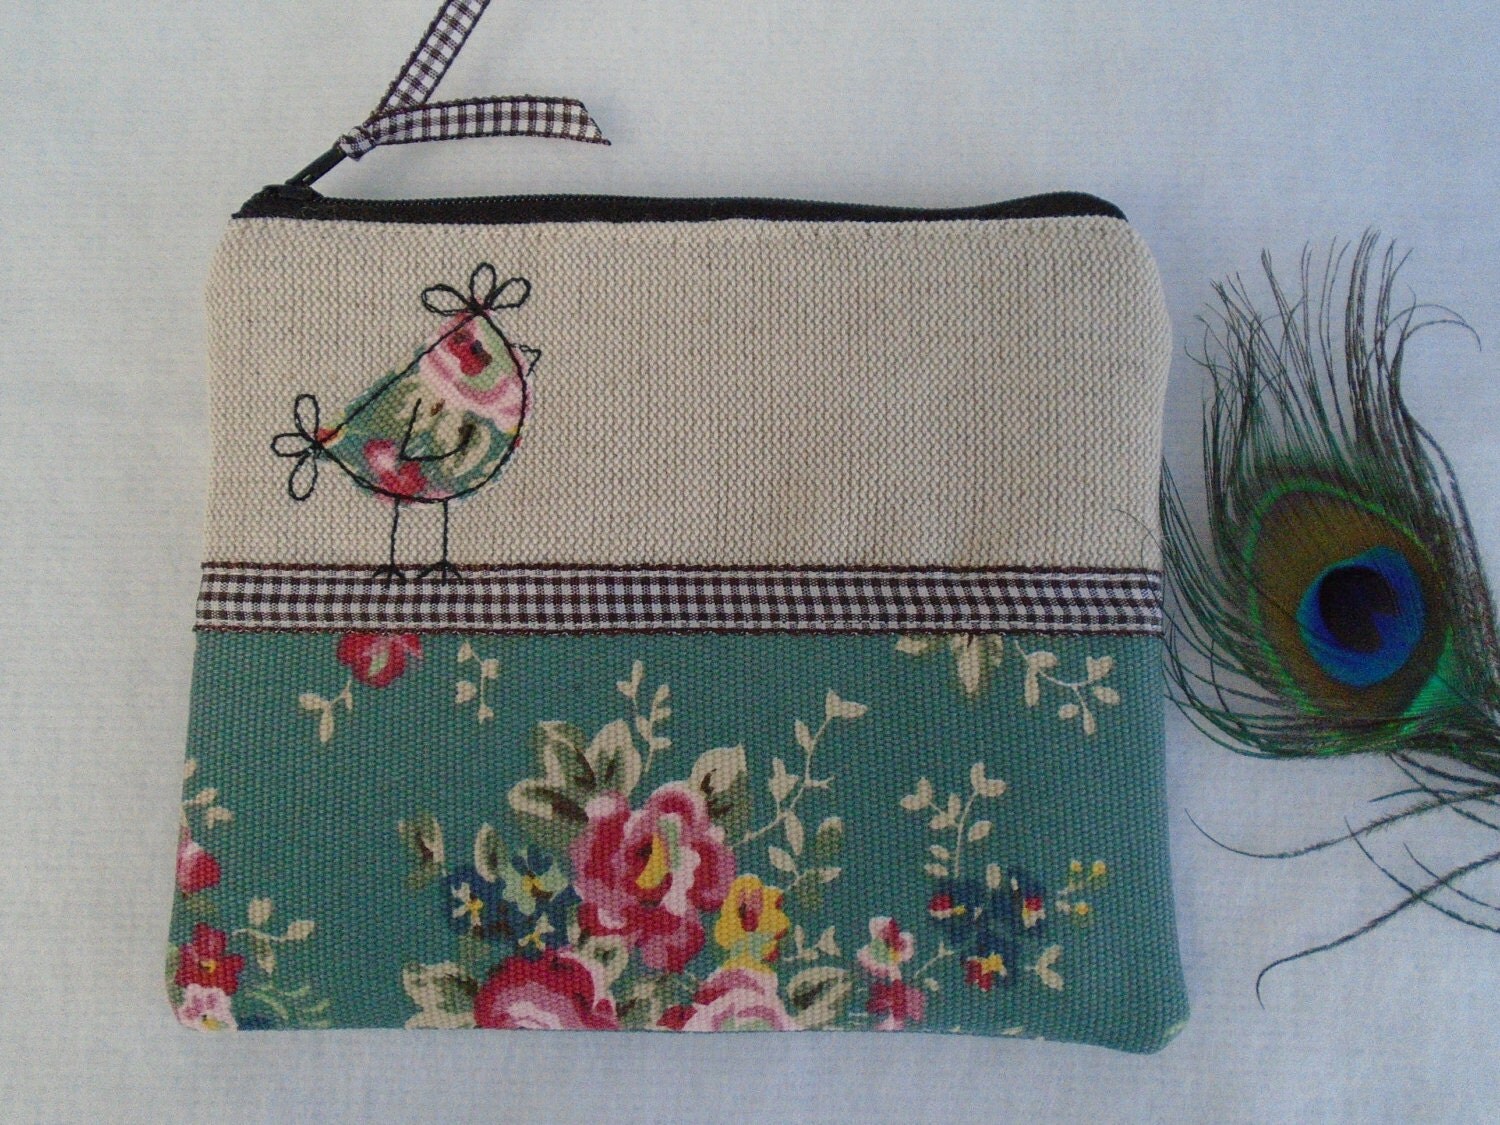 Handmade Small Cosmetic Makeup Bag or Purse with option to